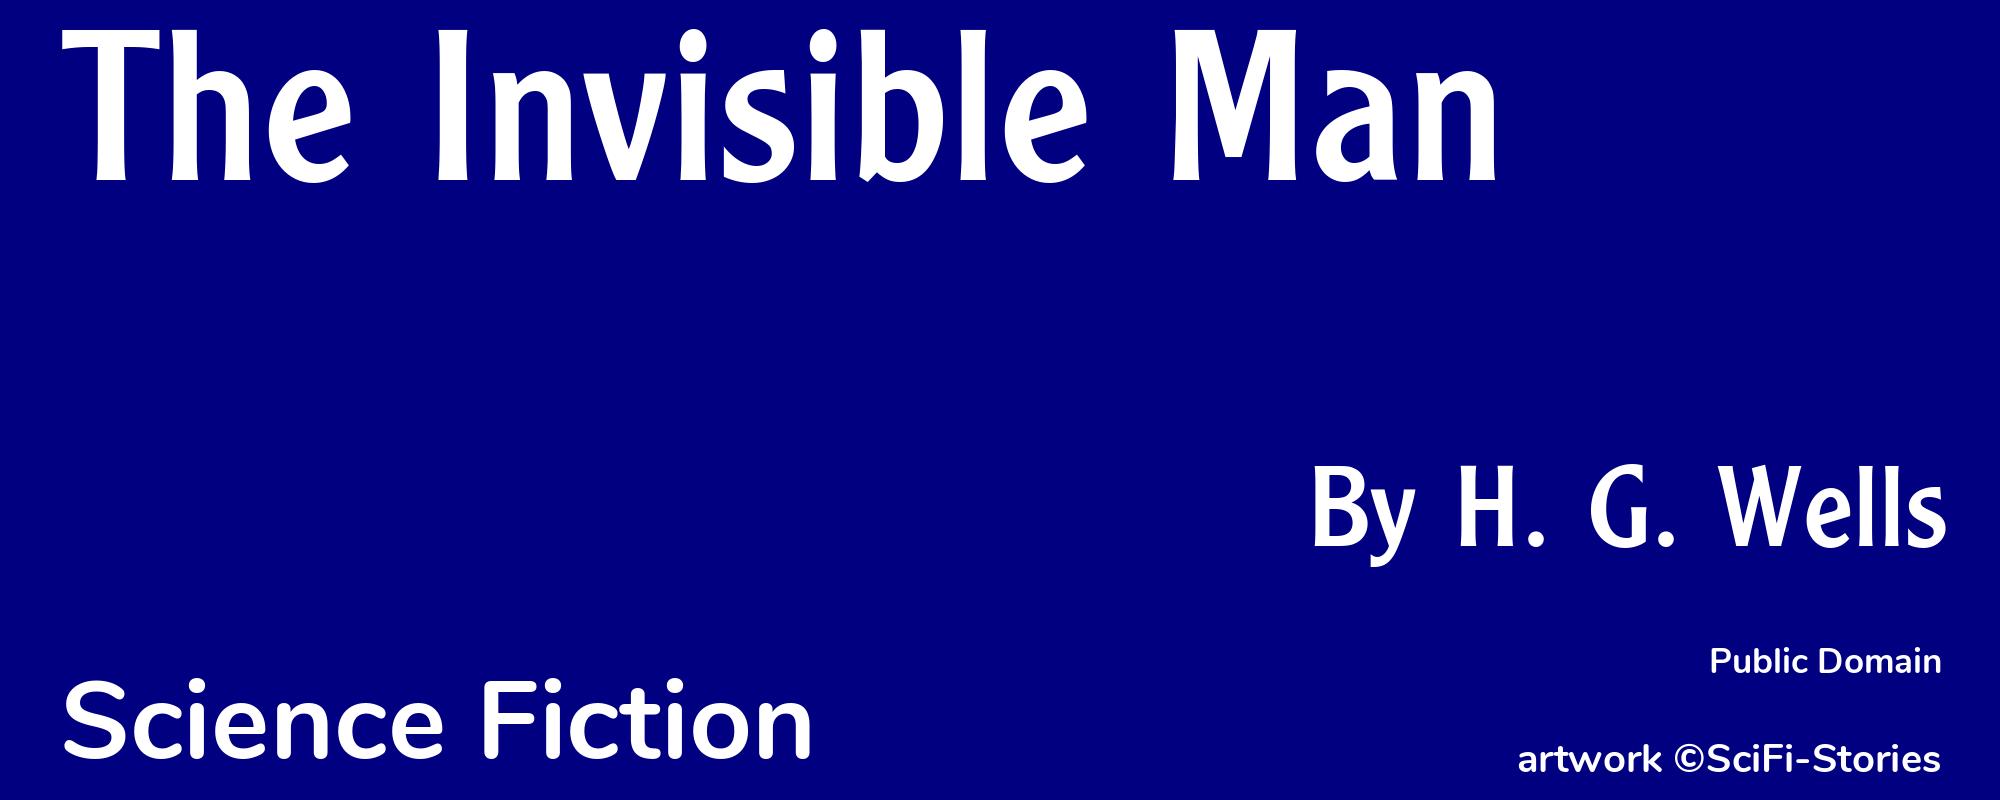 The Invisible Man - Cover